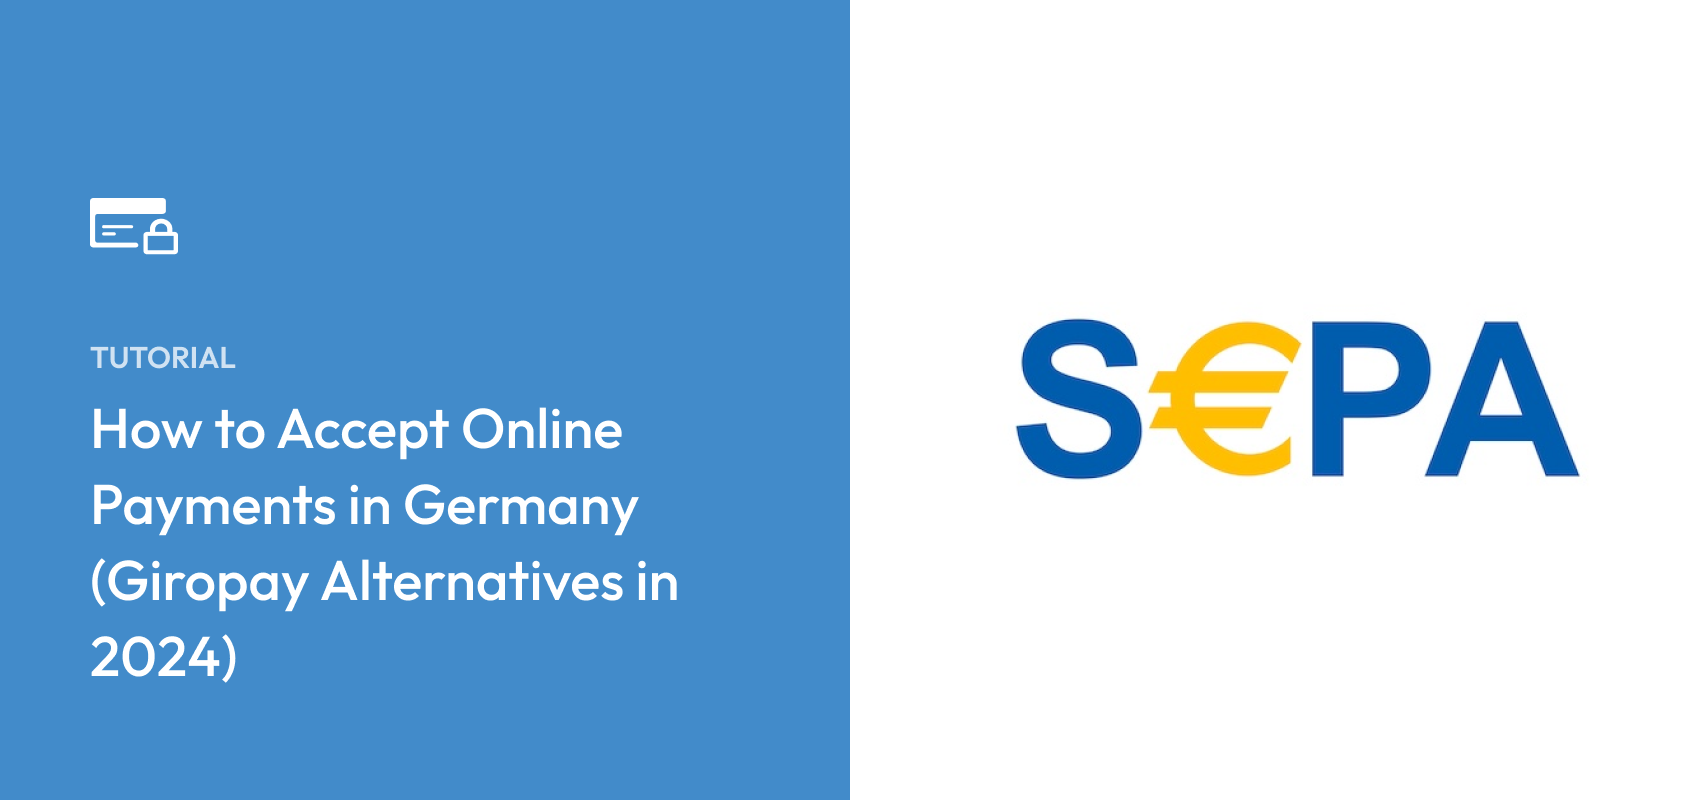 How to Accept Online Payments in Germany (2024)